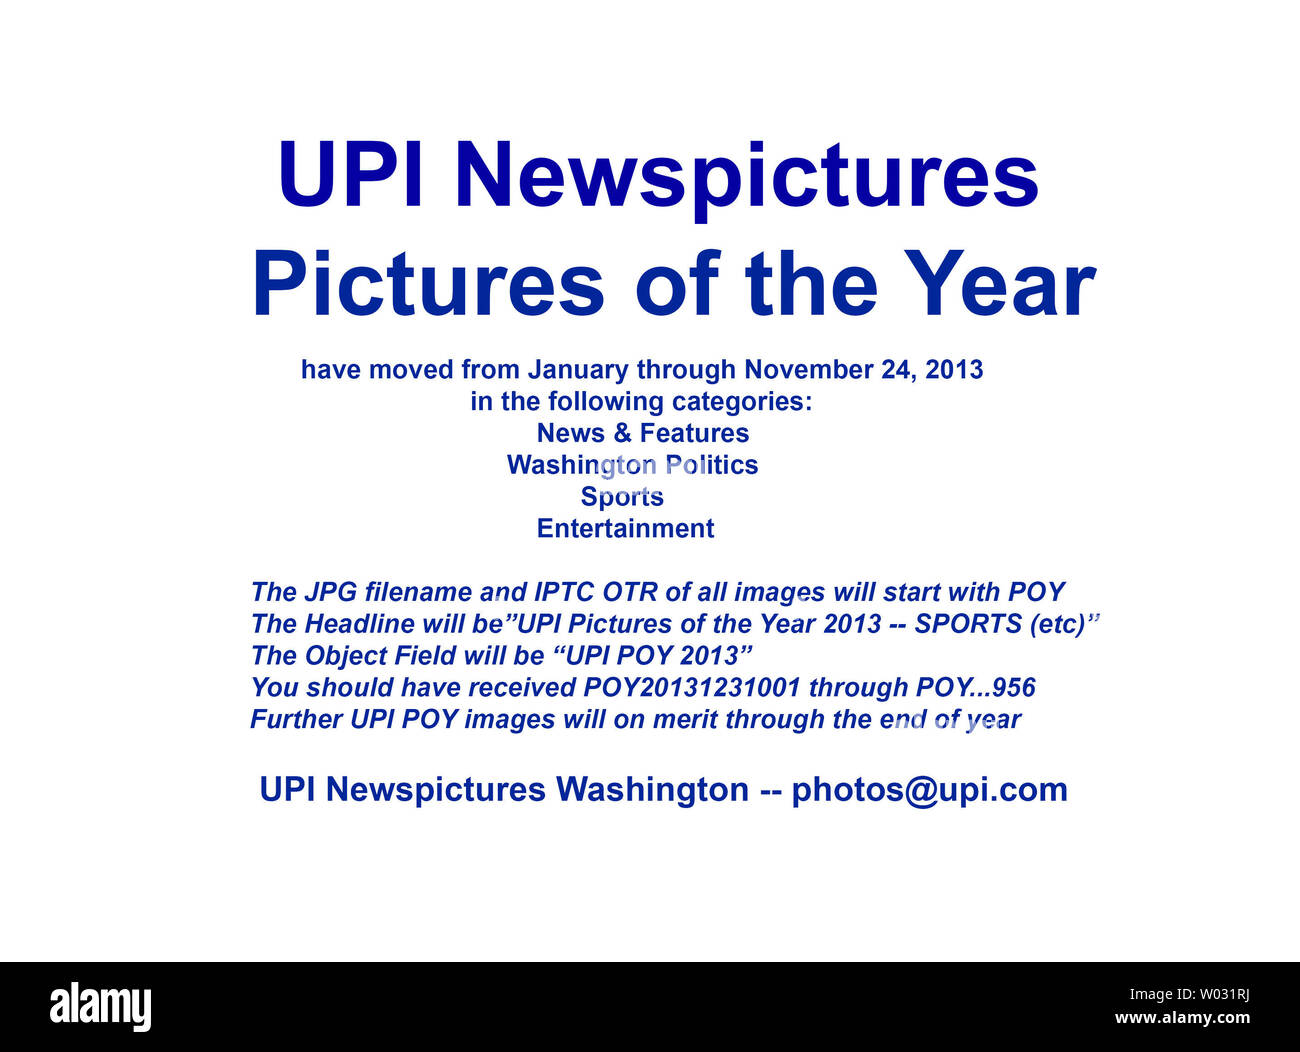 UPI Newspictures 2013 Pictures of the Year (POY) have moved for the approximate time period January through November 24, 2013.   You should have received image transmission numbers POY20131231001 through POY...956  in the following categories:  News & Features, Washington Politics, Sports, and Entertainment.  Further POY images will move on merit through the end of the year.  The JPG filename and IPTC OTR of all images will start with POY.  The Object Field will start with 'UPI POY 2013'.  Thank you,  UPI Washington    photos@upi.com Stock Photo